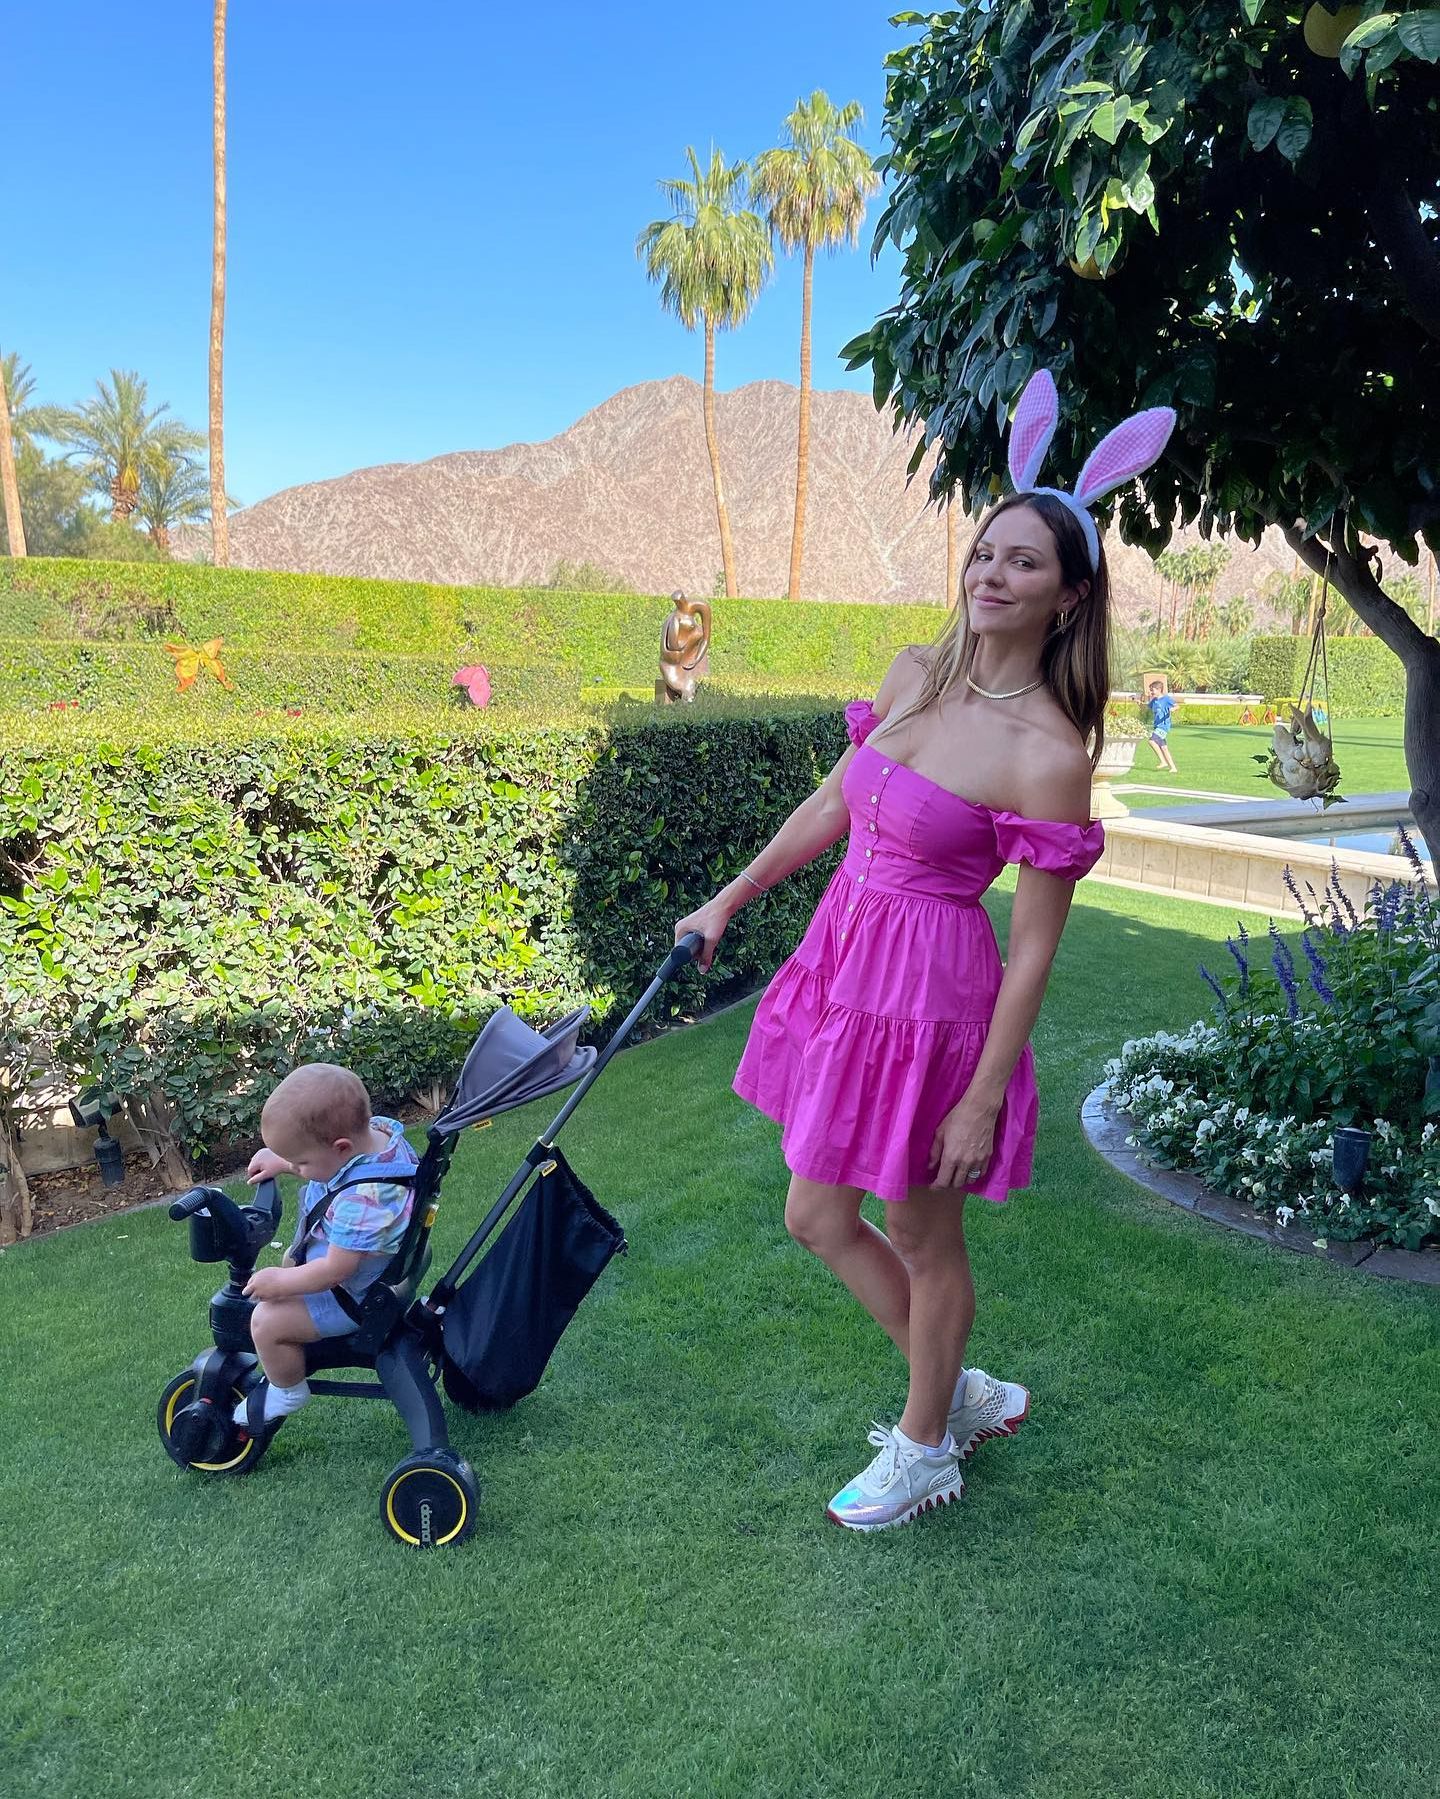 Katharine McPhee Shares Rare Photos of Her and David Foster's Easter With Son Rennie 5